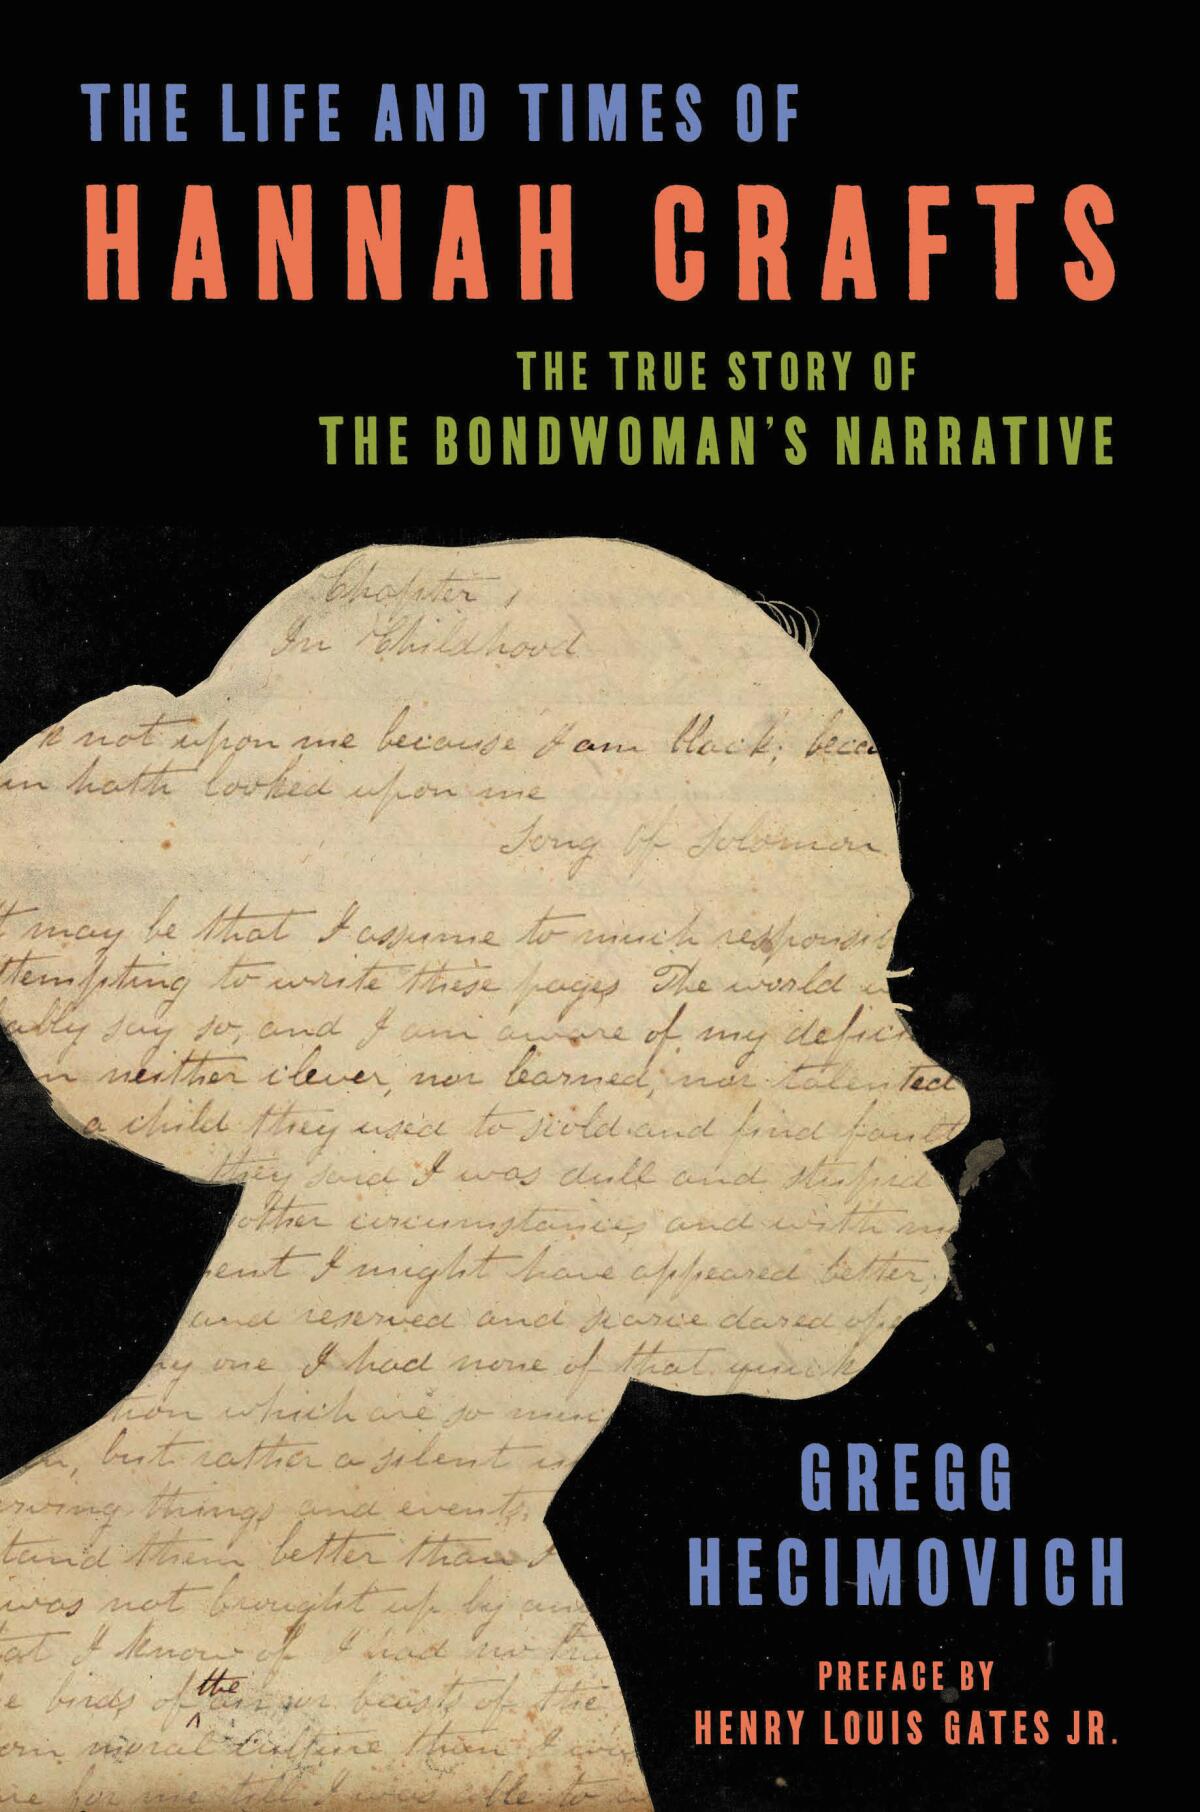 The cover of "The Life and Times of Hannah Crafts," featuring her silhouette filled with handwritten letters.